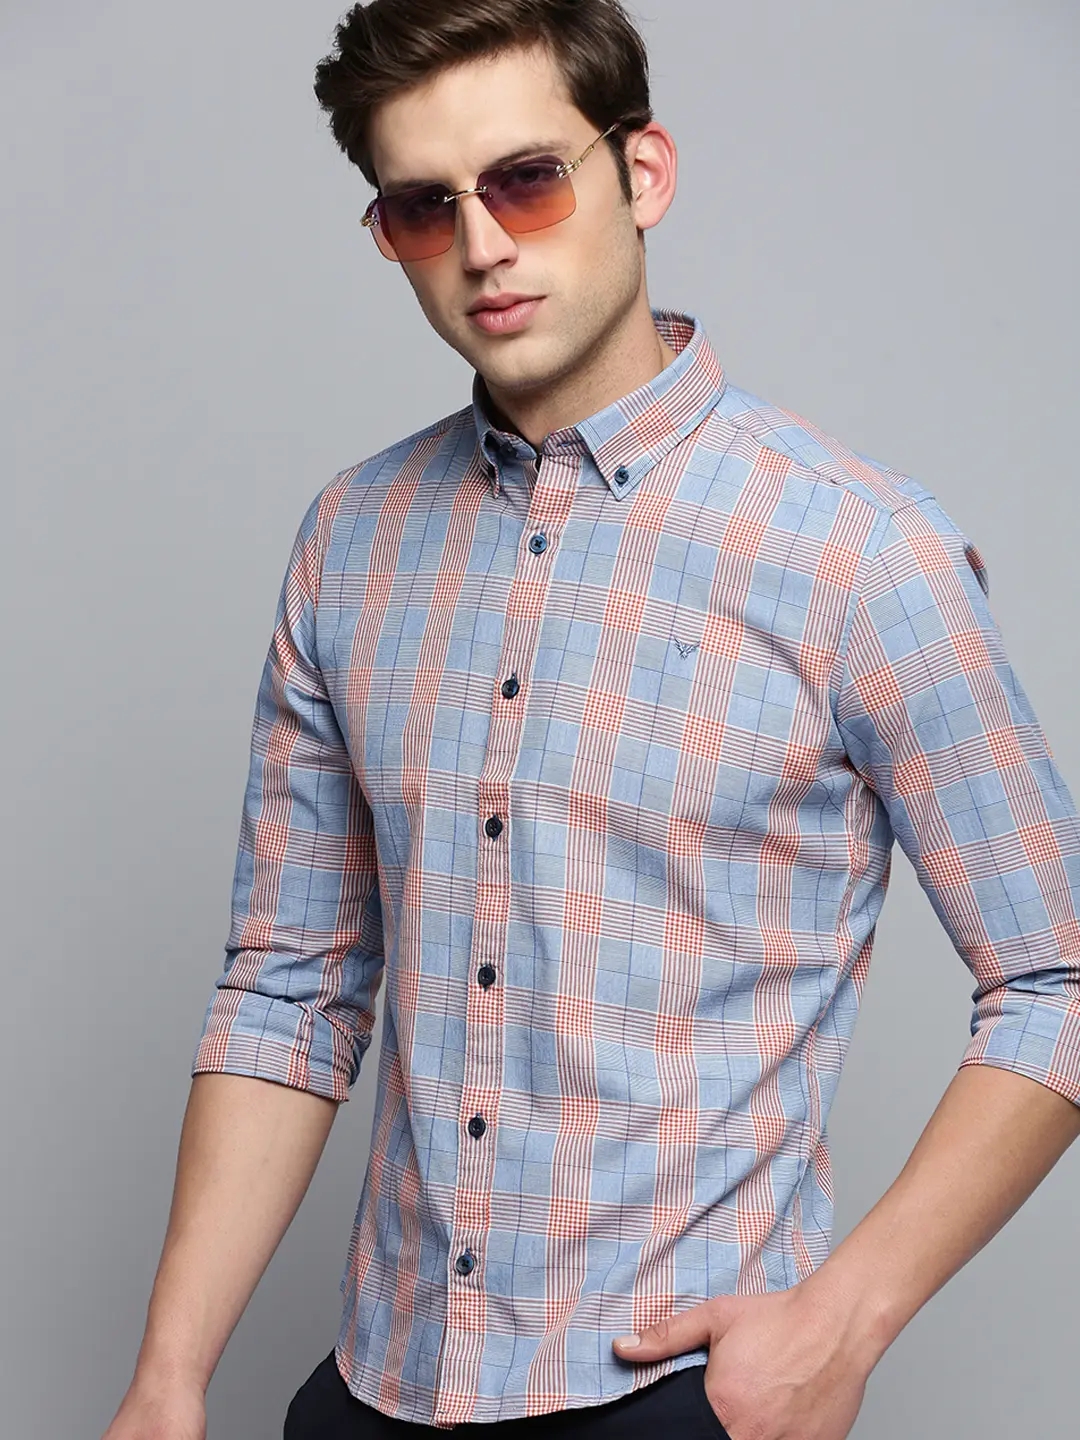 SHOWOFF Men's Spread Collar Checked Blue Classic Shirt